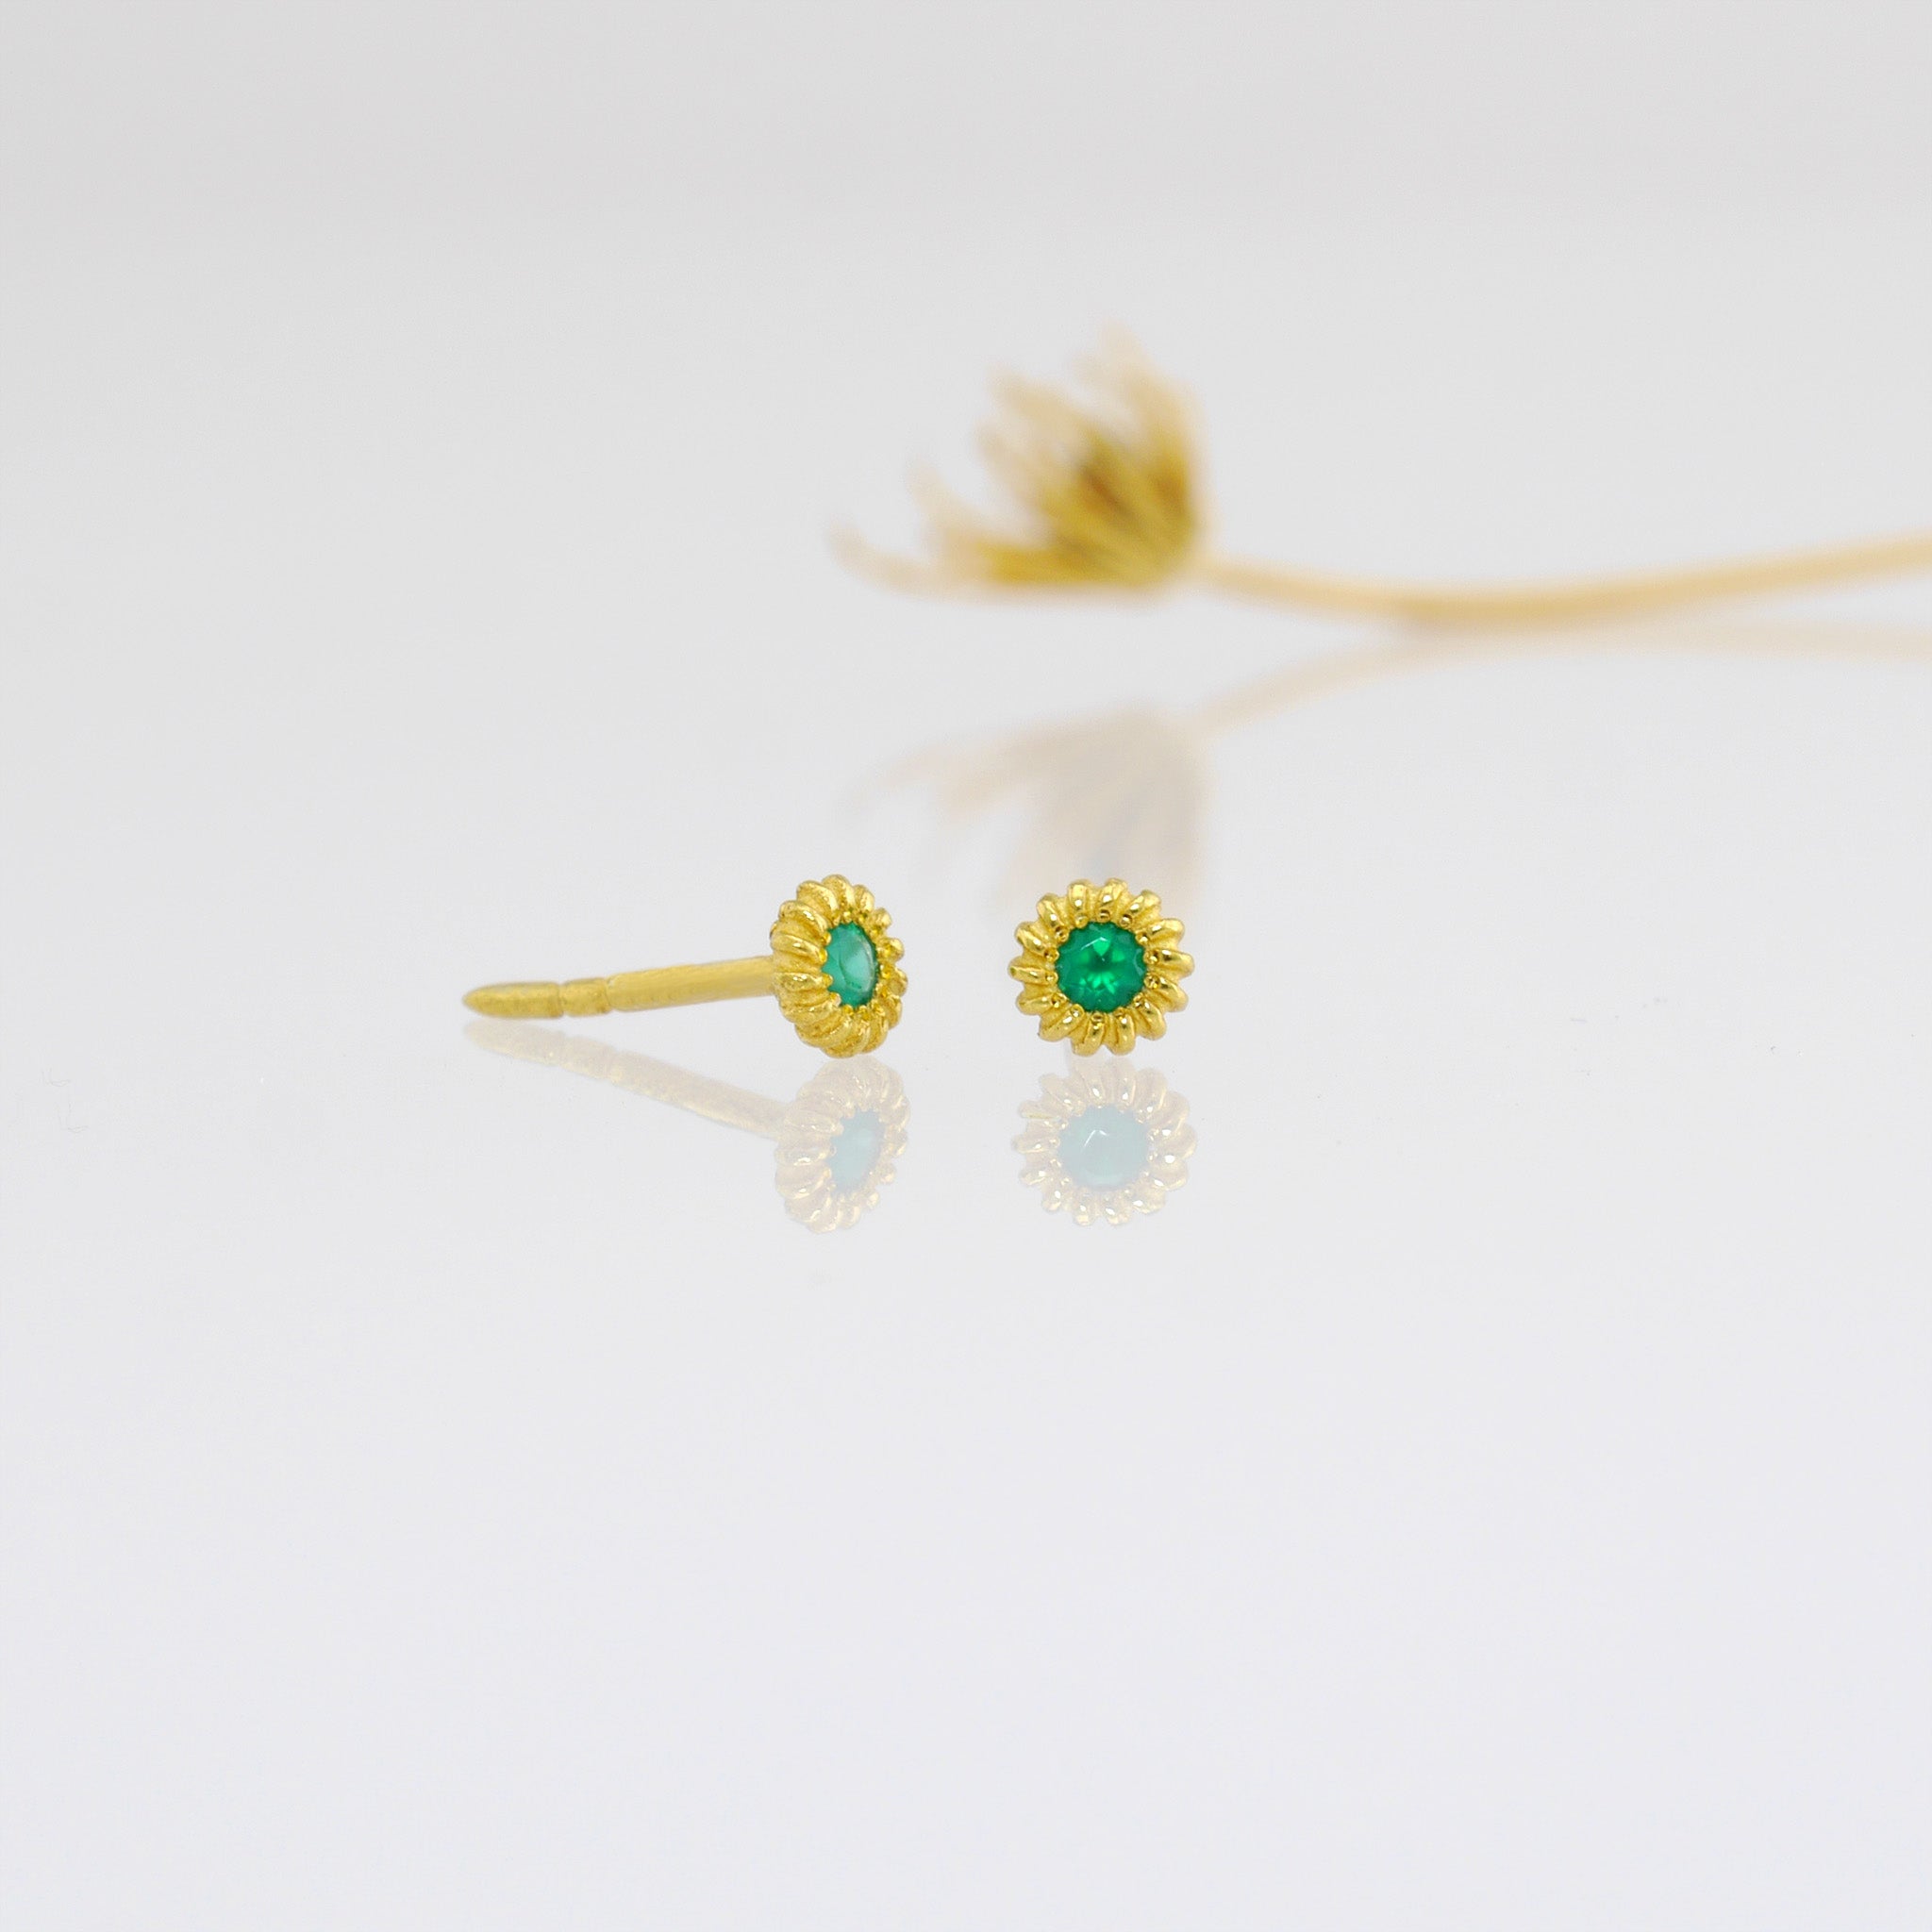 Tiny, coiled 18k gold studs with Emerald.